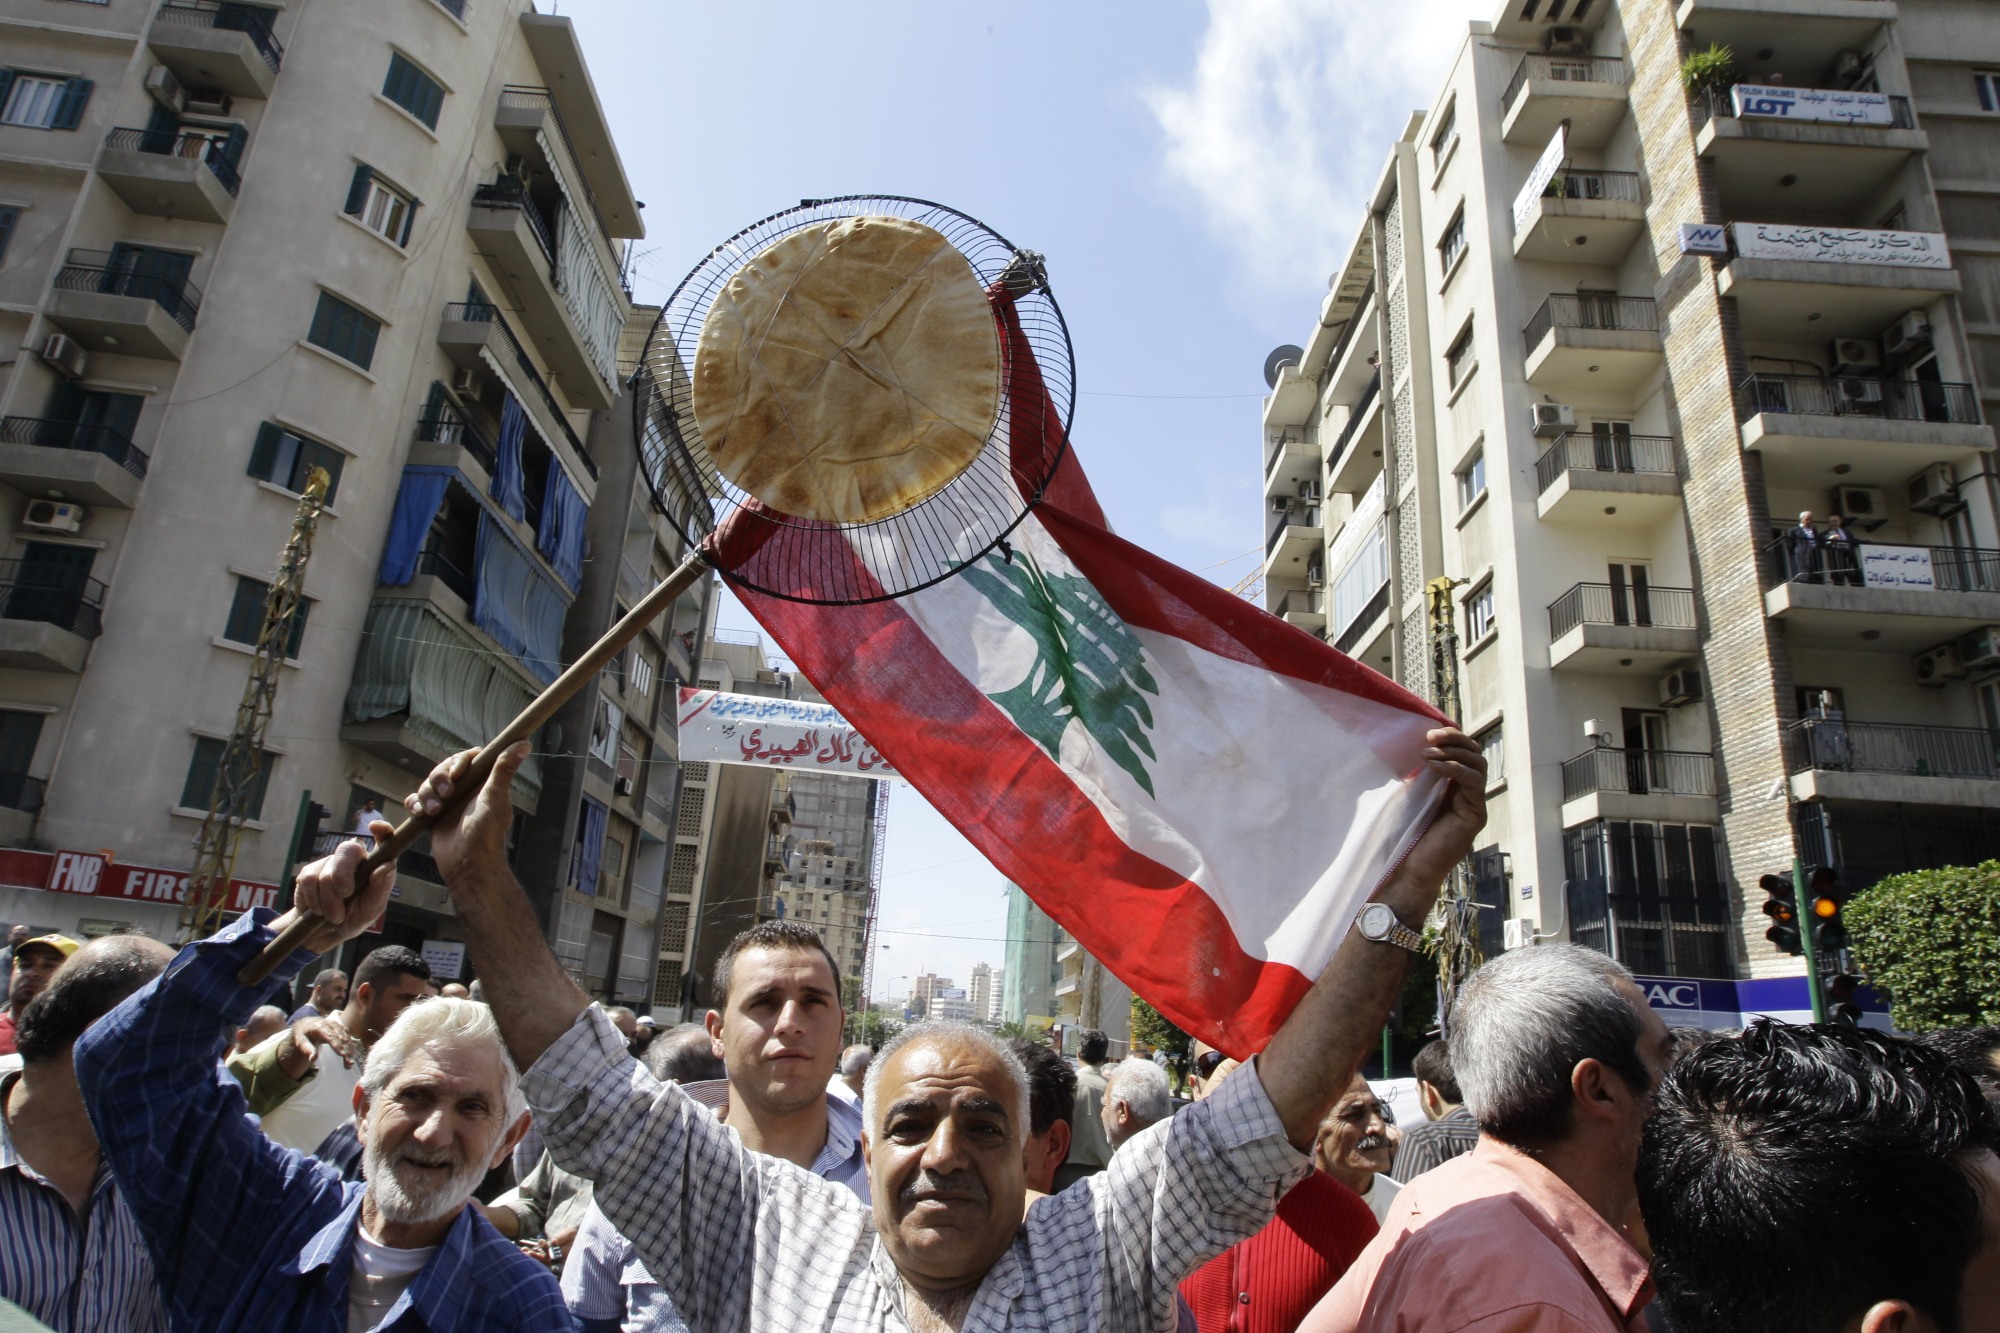 Lebanese bus and taxi drivers carry a Lebanese flag and a flatbread during an April 2010 rally in Beirut protesting fuel prices (AFP)